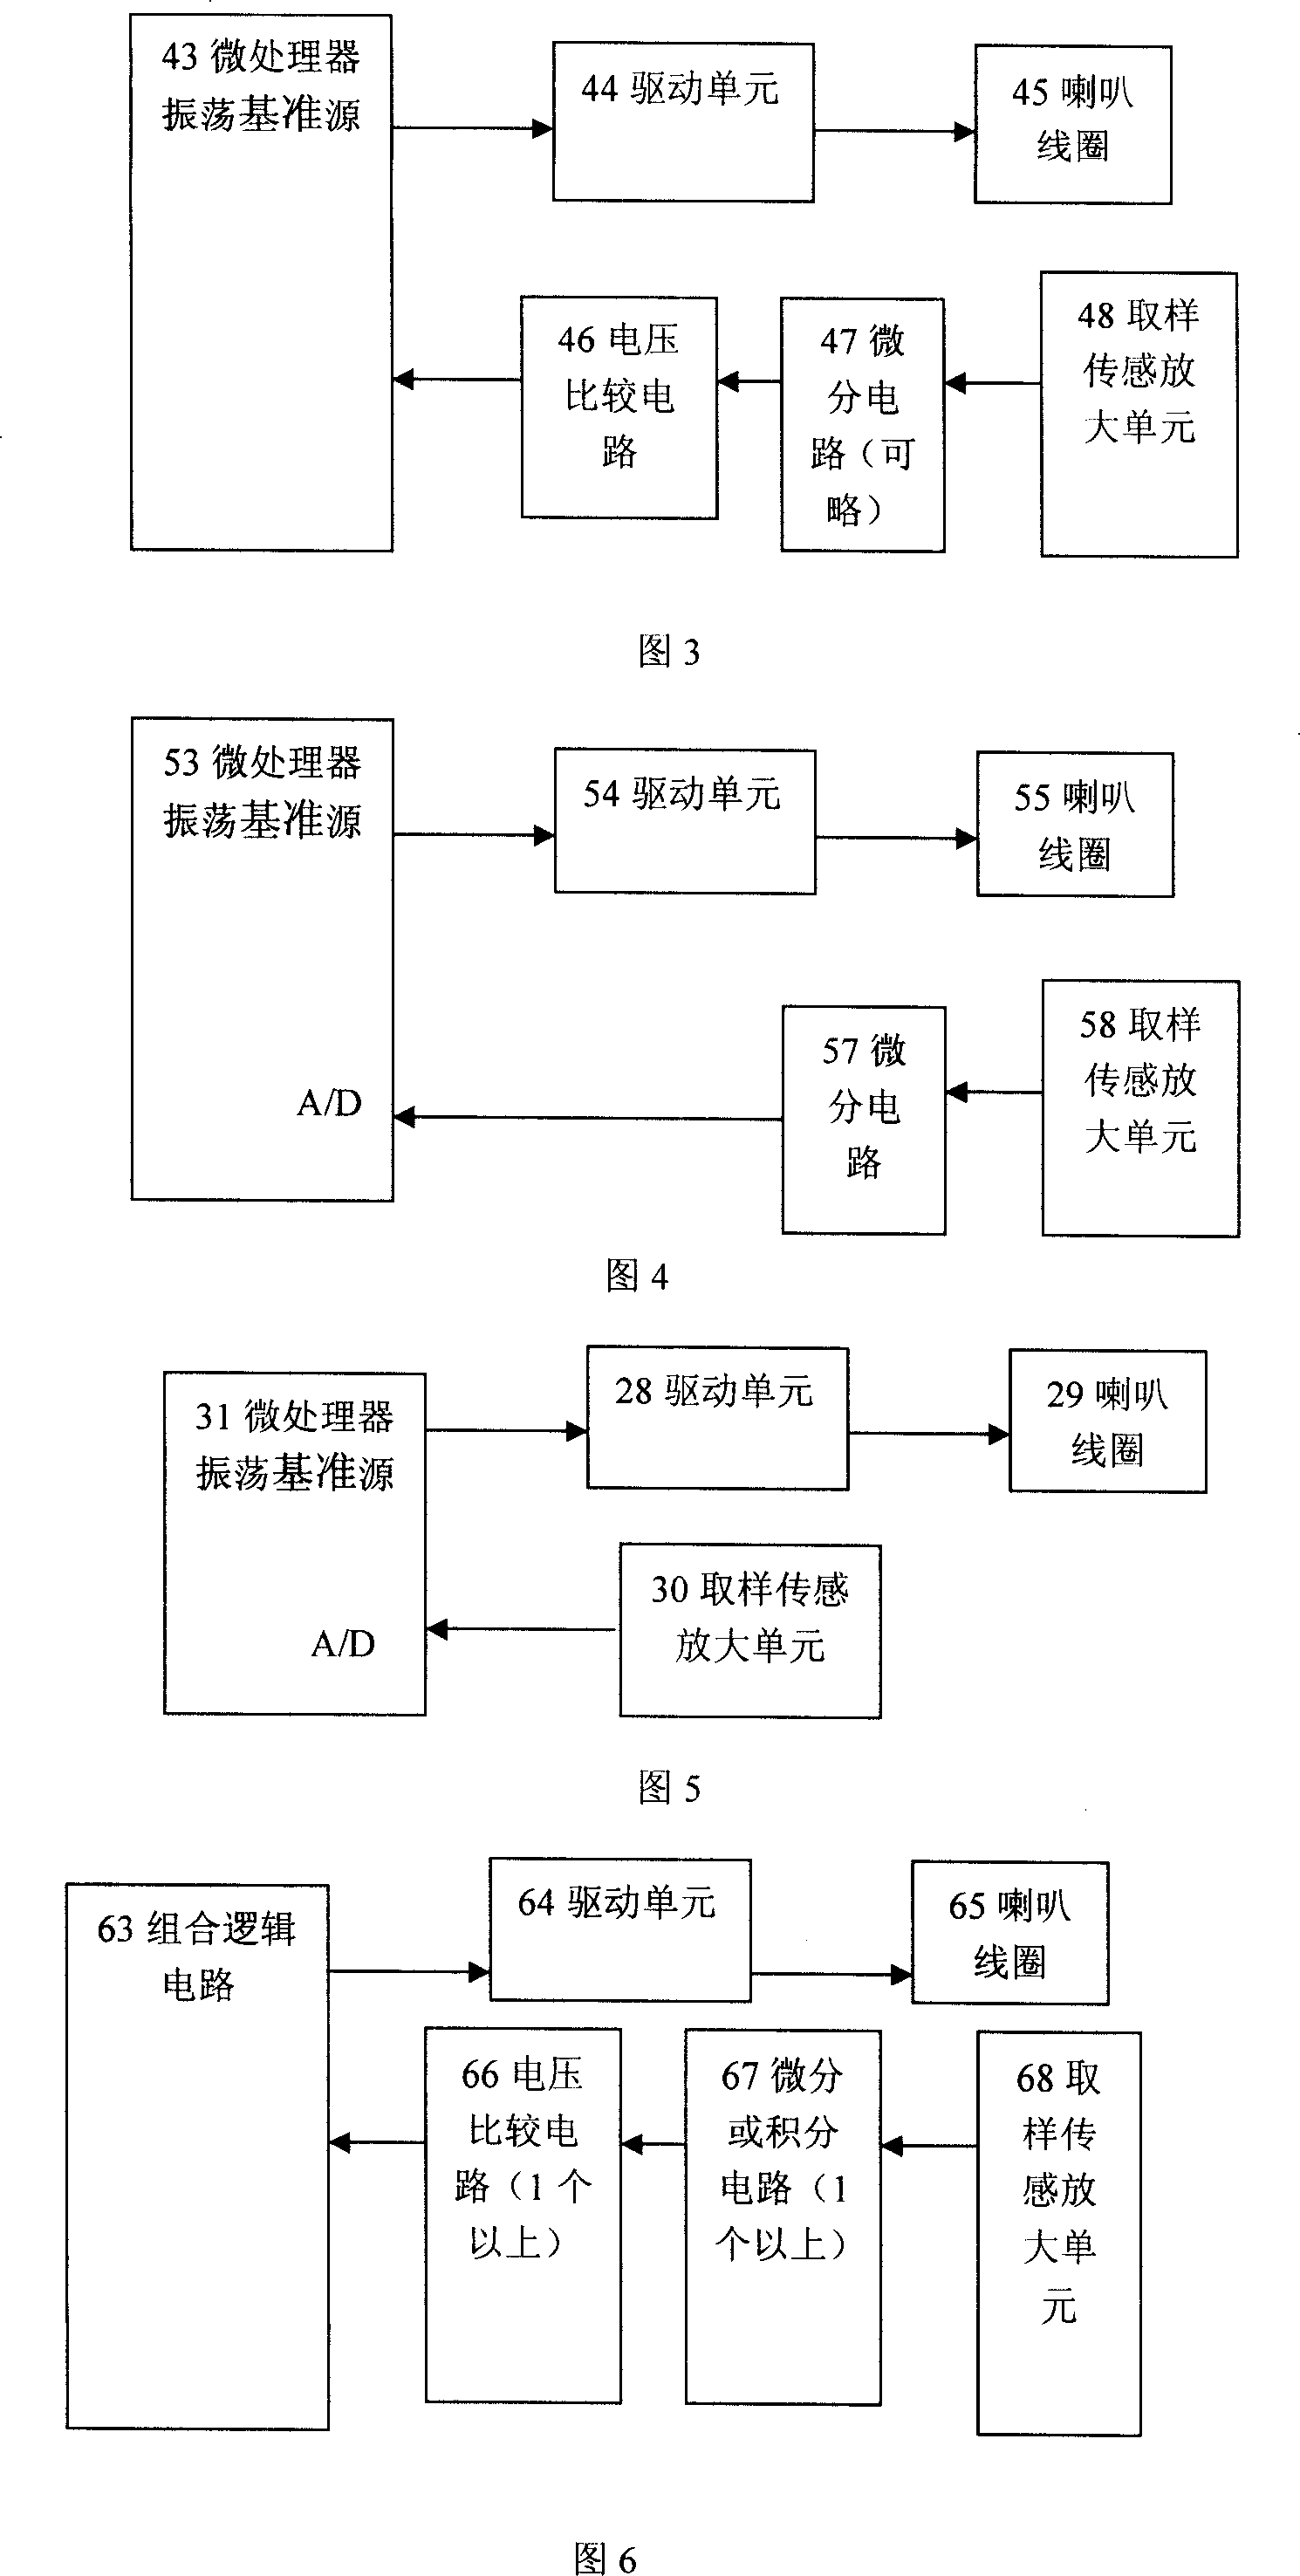 Self-adaptive sounding method and apparatus for electric sounding device